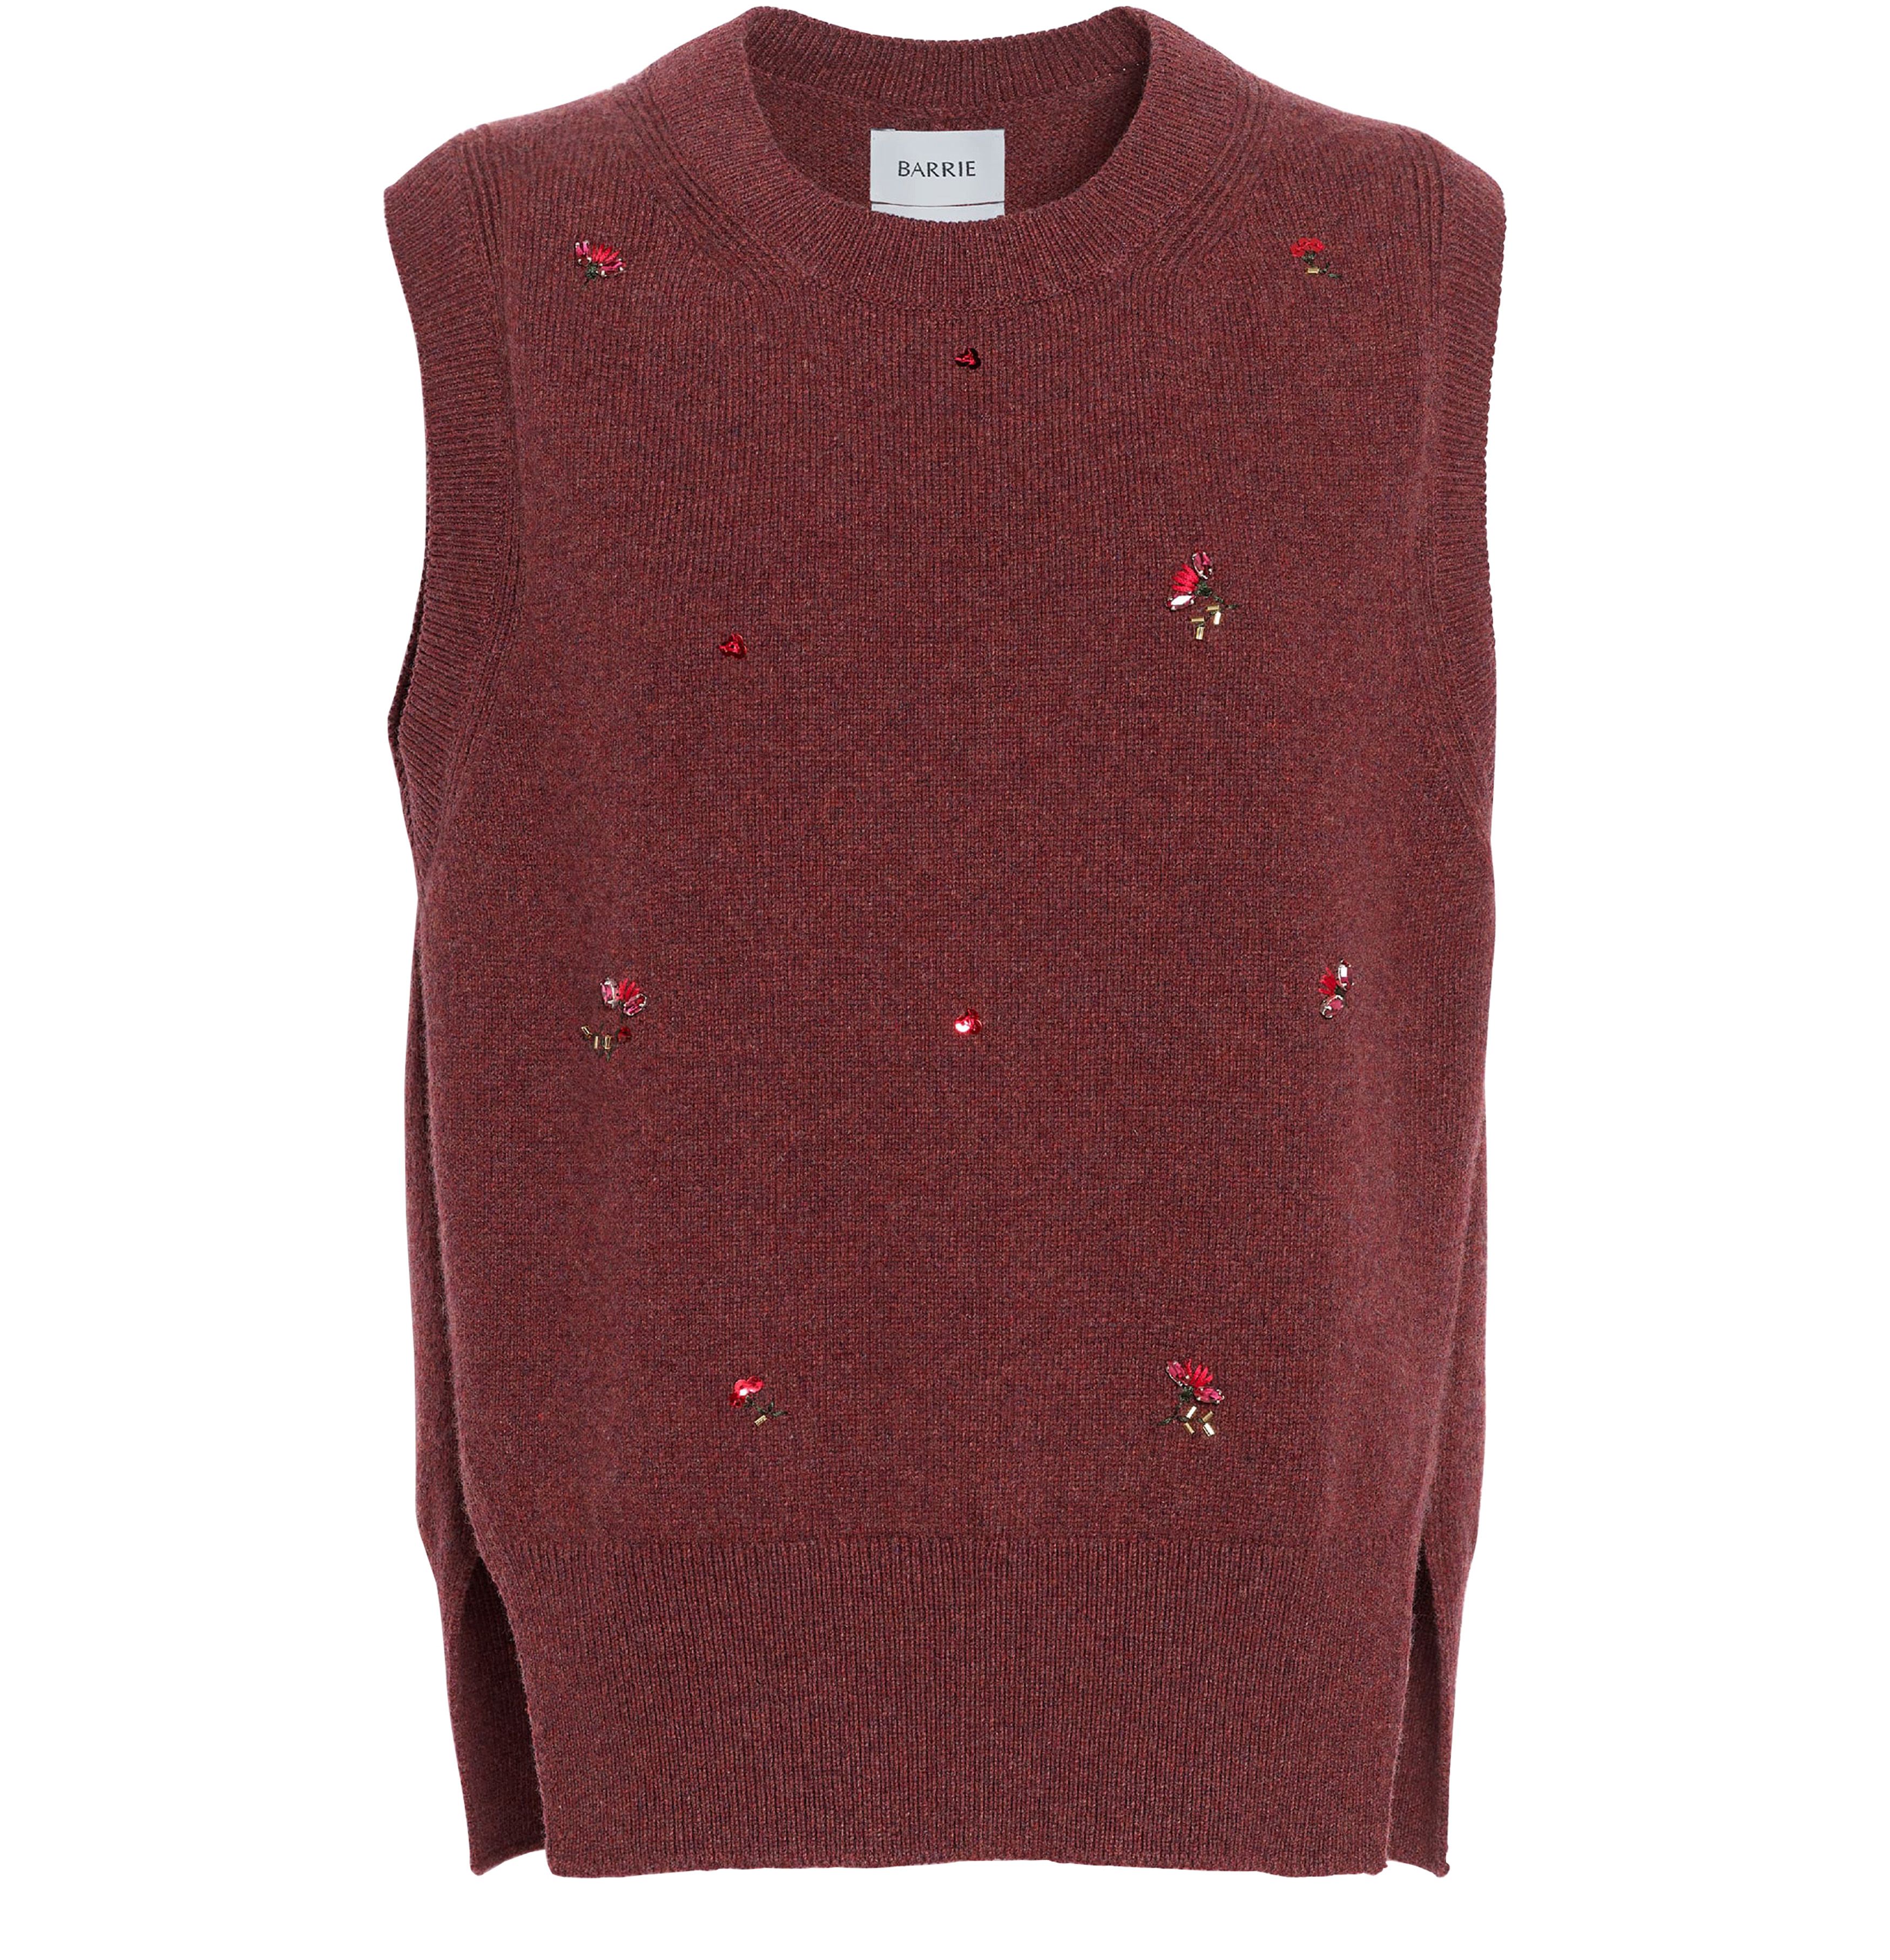 Barrie Iconic sleeveless jumper in cashmere with floral embroidery